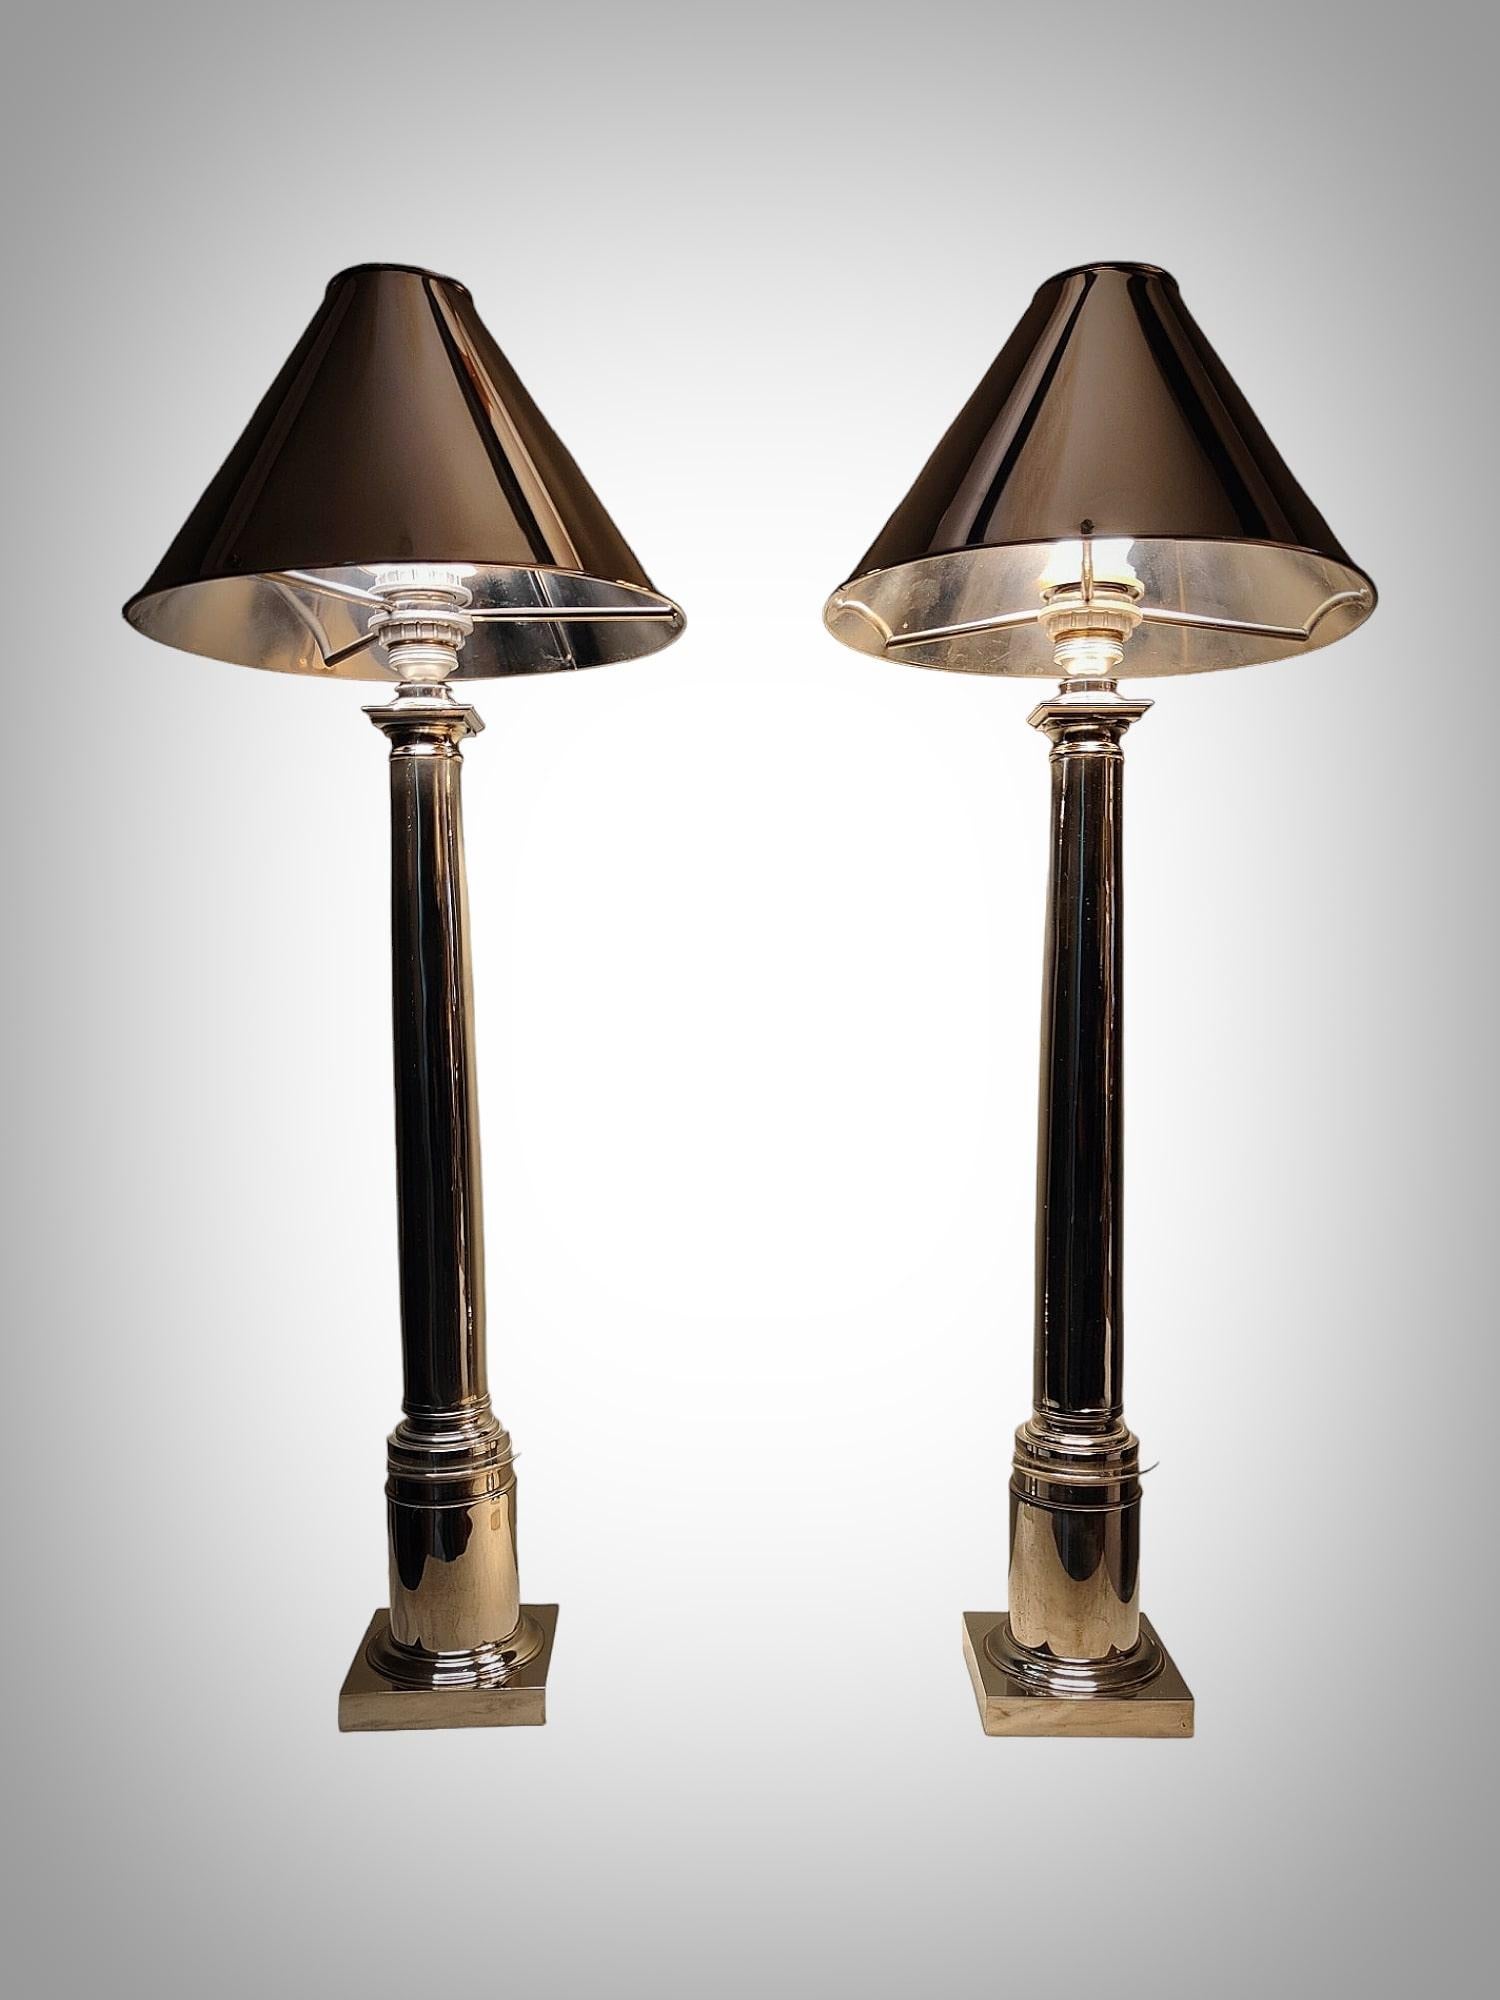 Elegant Architectural Design Bronze Lamps from the 1970s For Sale 1